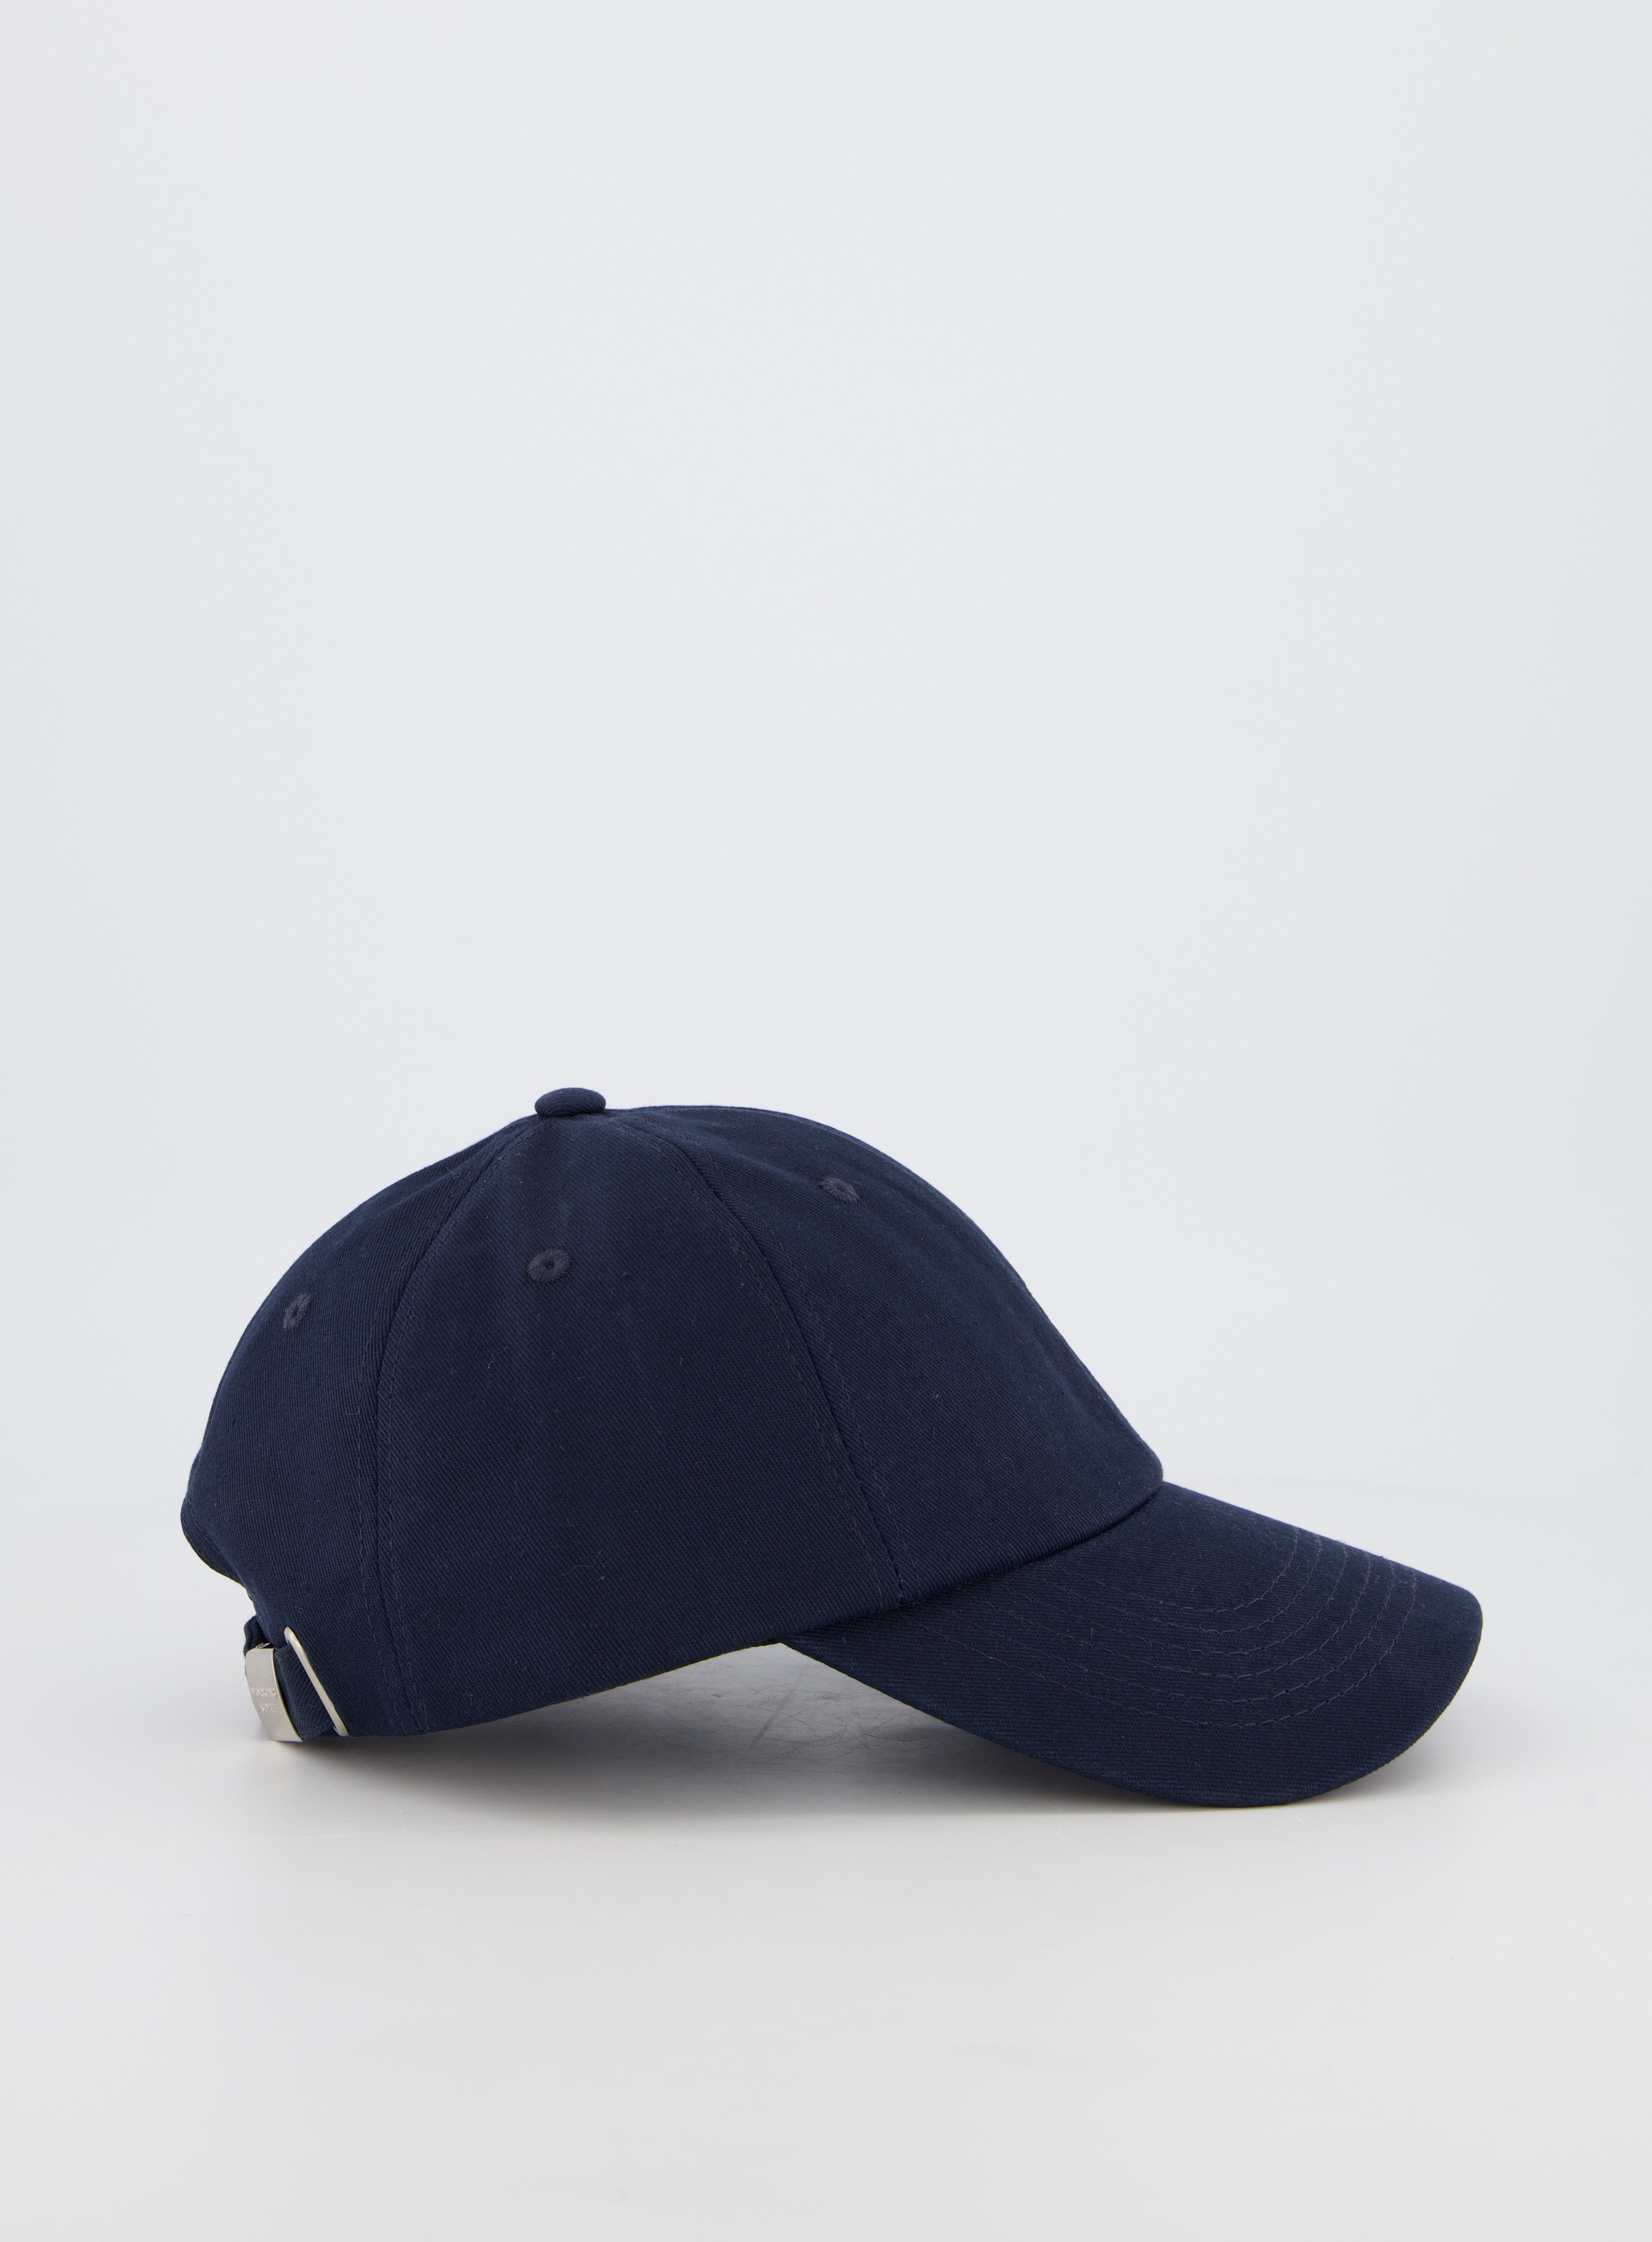 Mantle Navy Cotton Twill Cap | Working Style